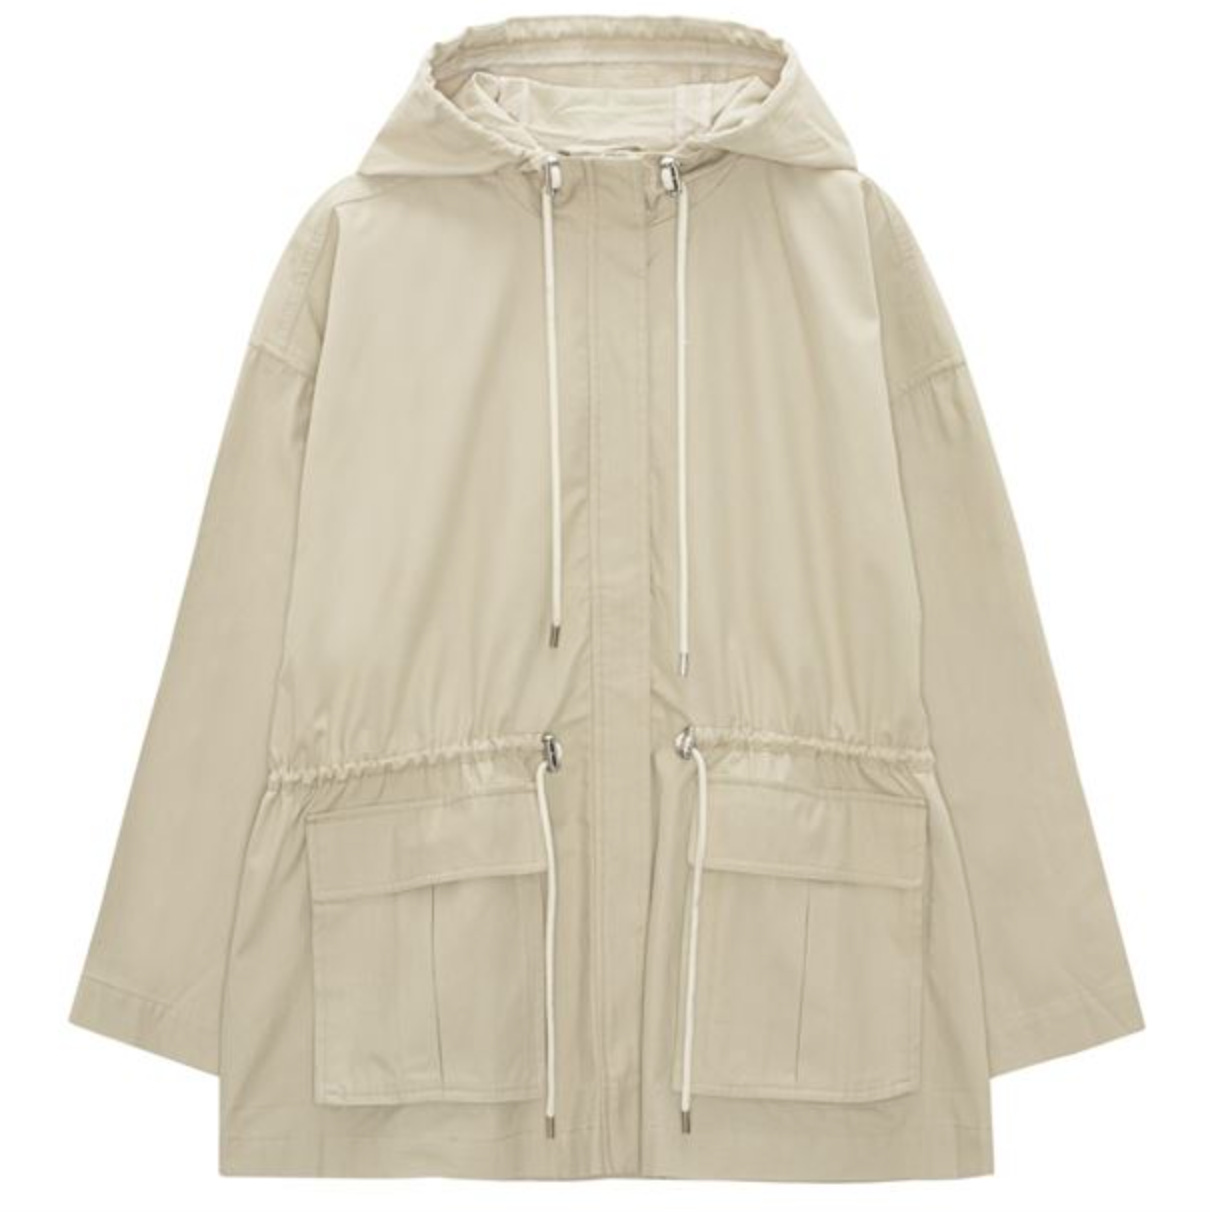 The parka shell spring best a coat is